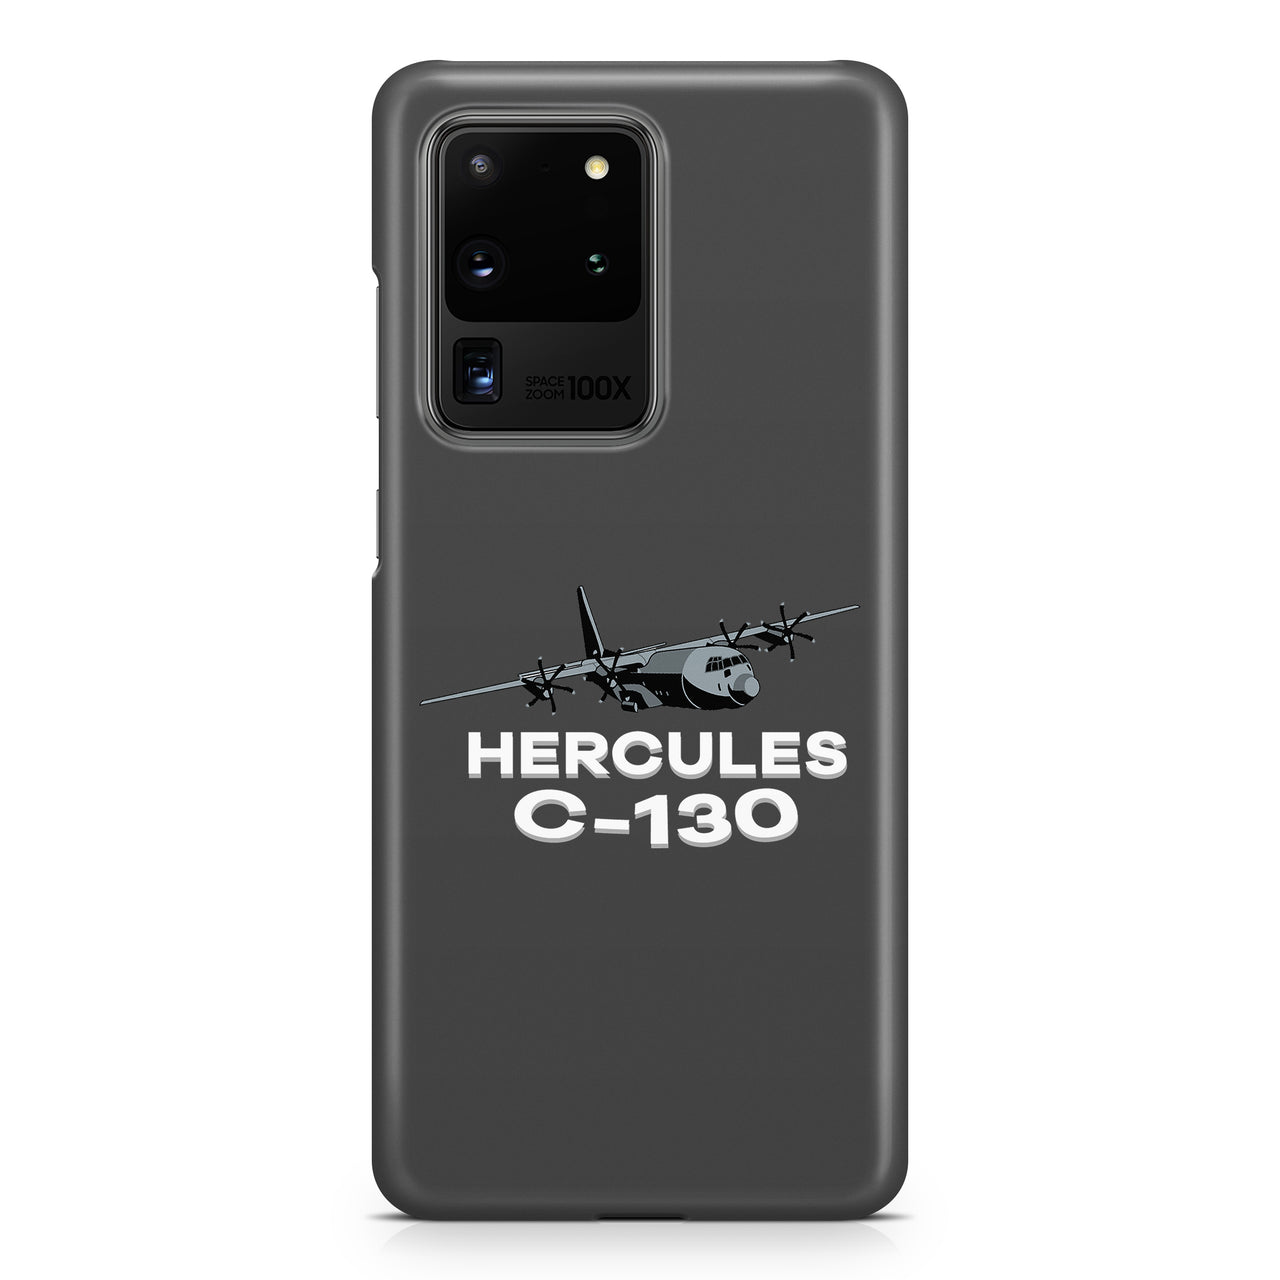 The Hercules C130 Samsung A Cases